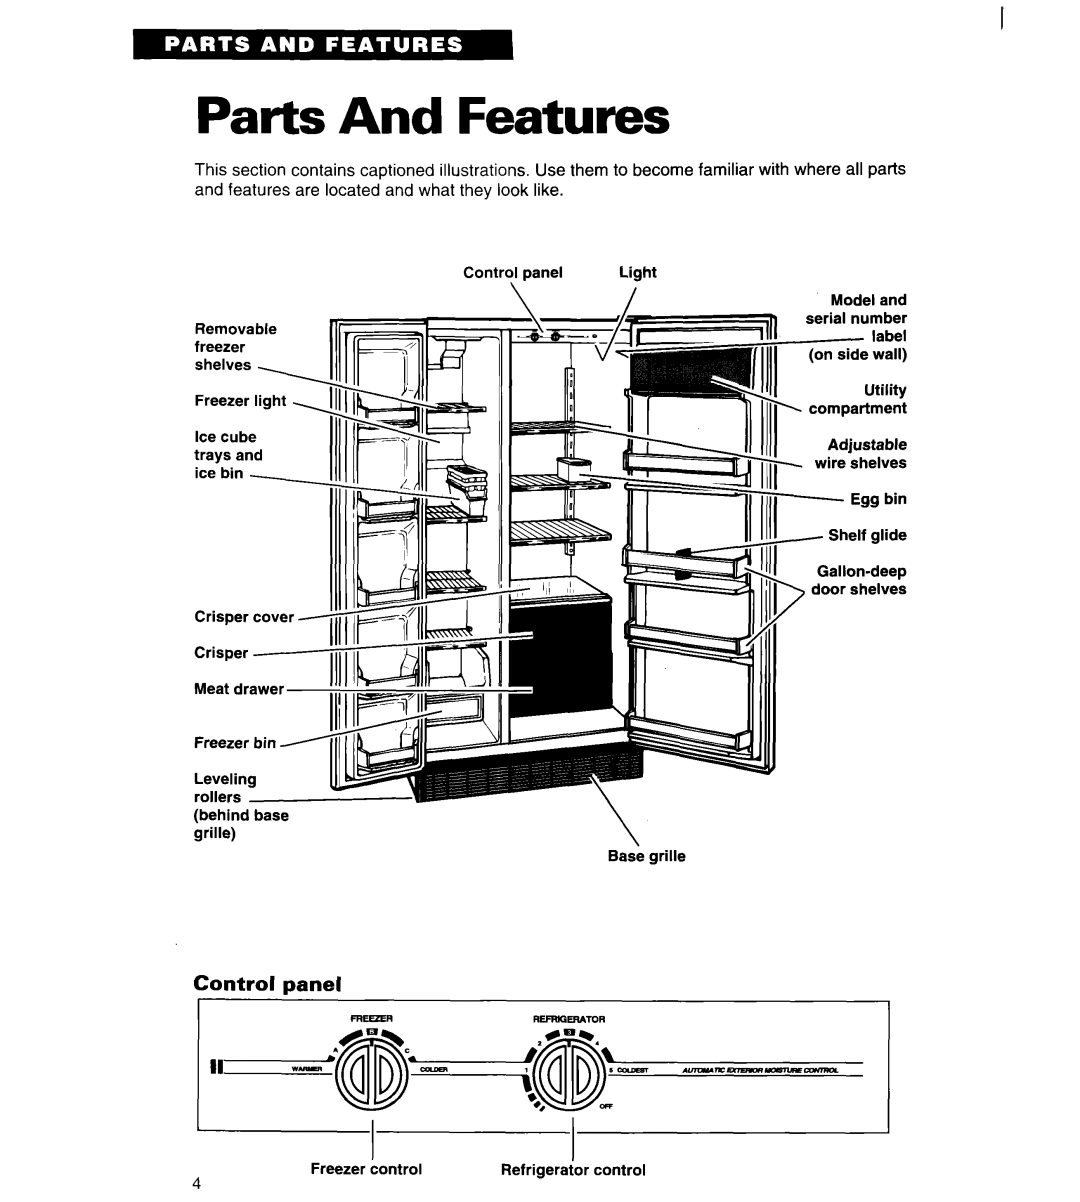 Whirlpool 4ED20ZK important safety instructions Parts And Features, Control panel REFRIGERATOR l=d@%k@jj 